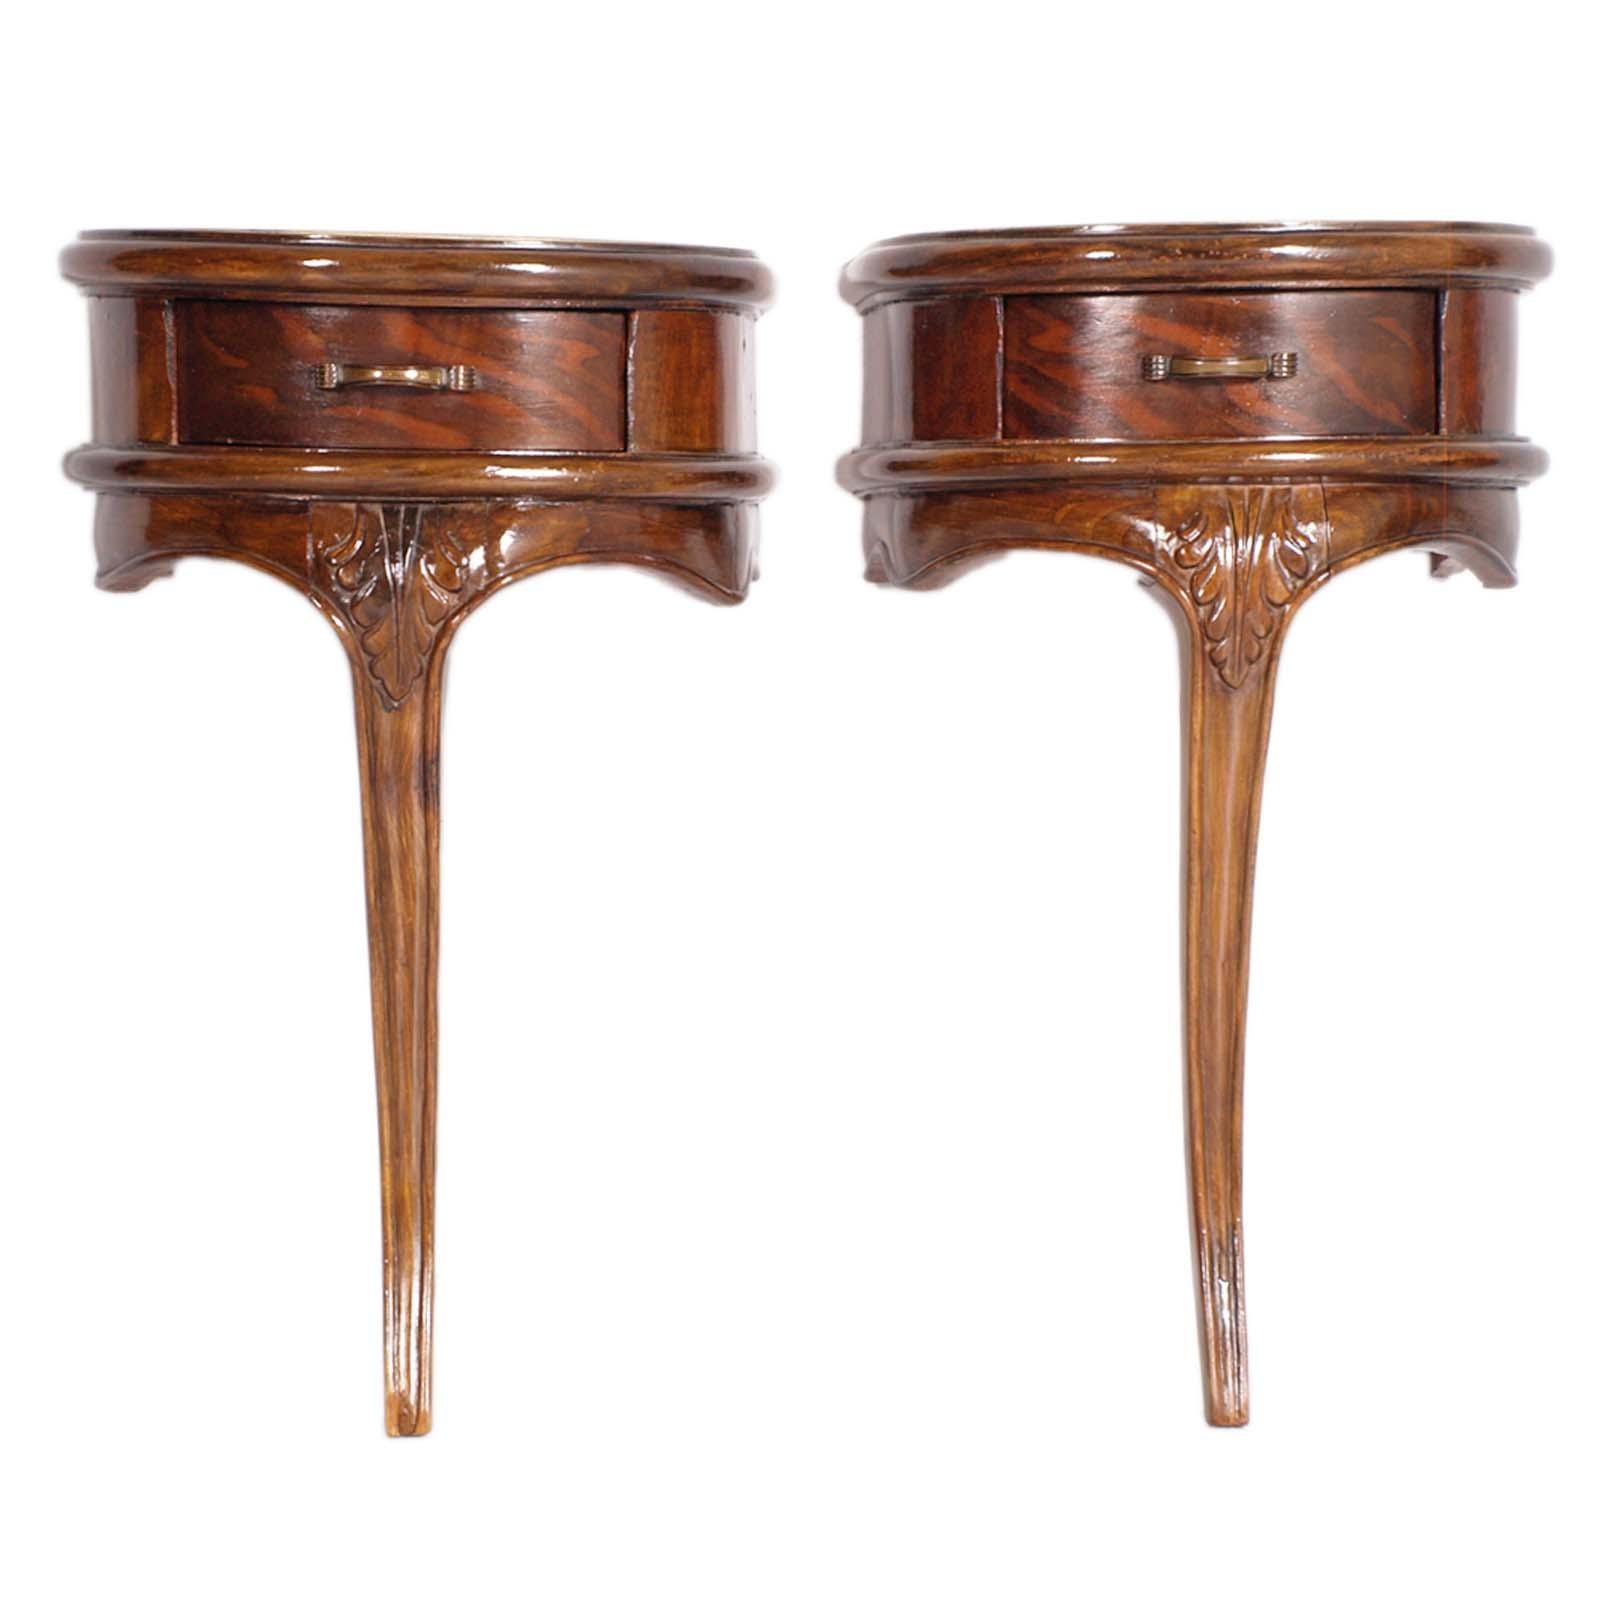 Elegant 1910s Art Nouveau nighstands in hand-carved walnut by Meroni & Fossati, atributable Eugenio Quarti, with gilt painted glass top. Wax polished.

Abuot Meroni & Fossati:
A. Meroni & R. Fossati - founded in 1870, it was one of the oldest and